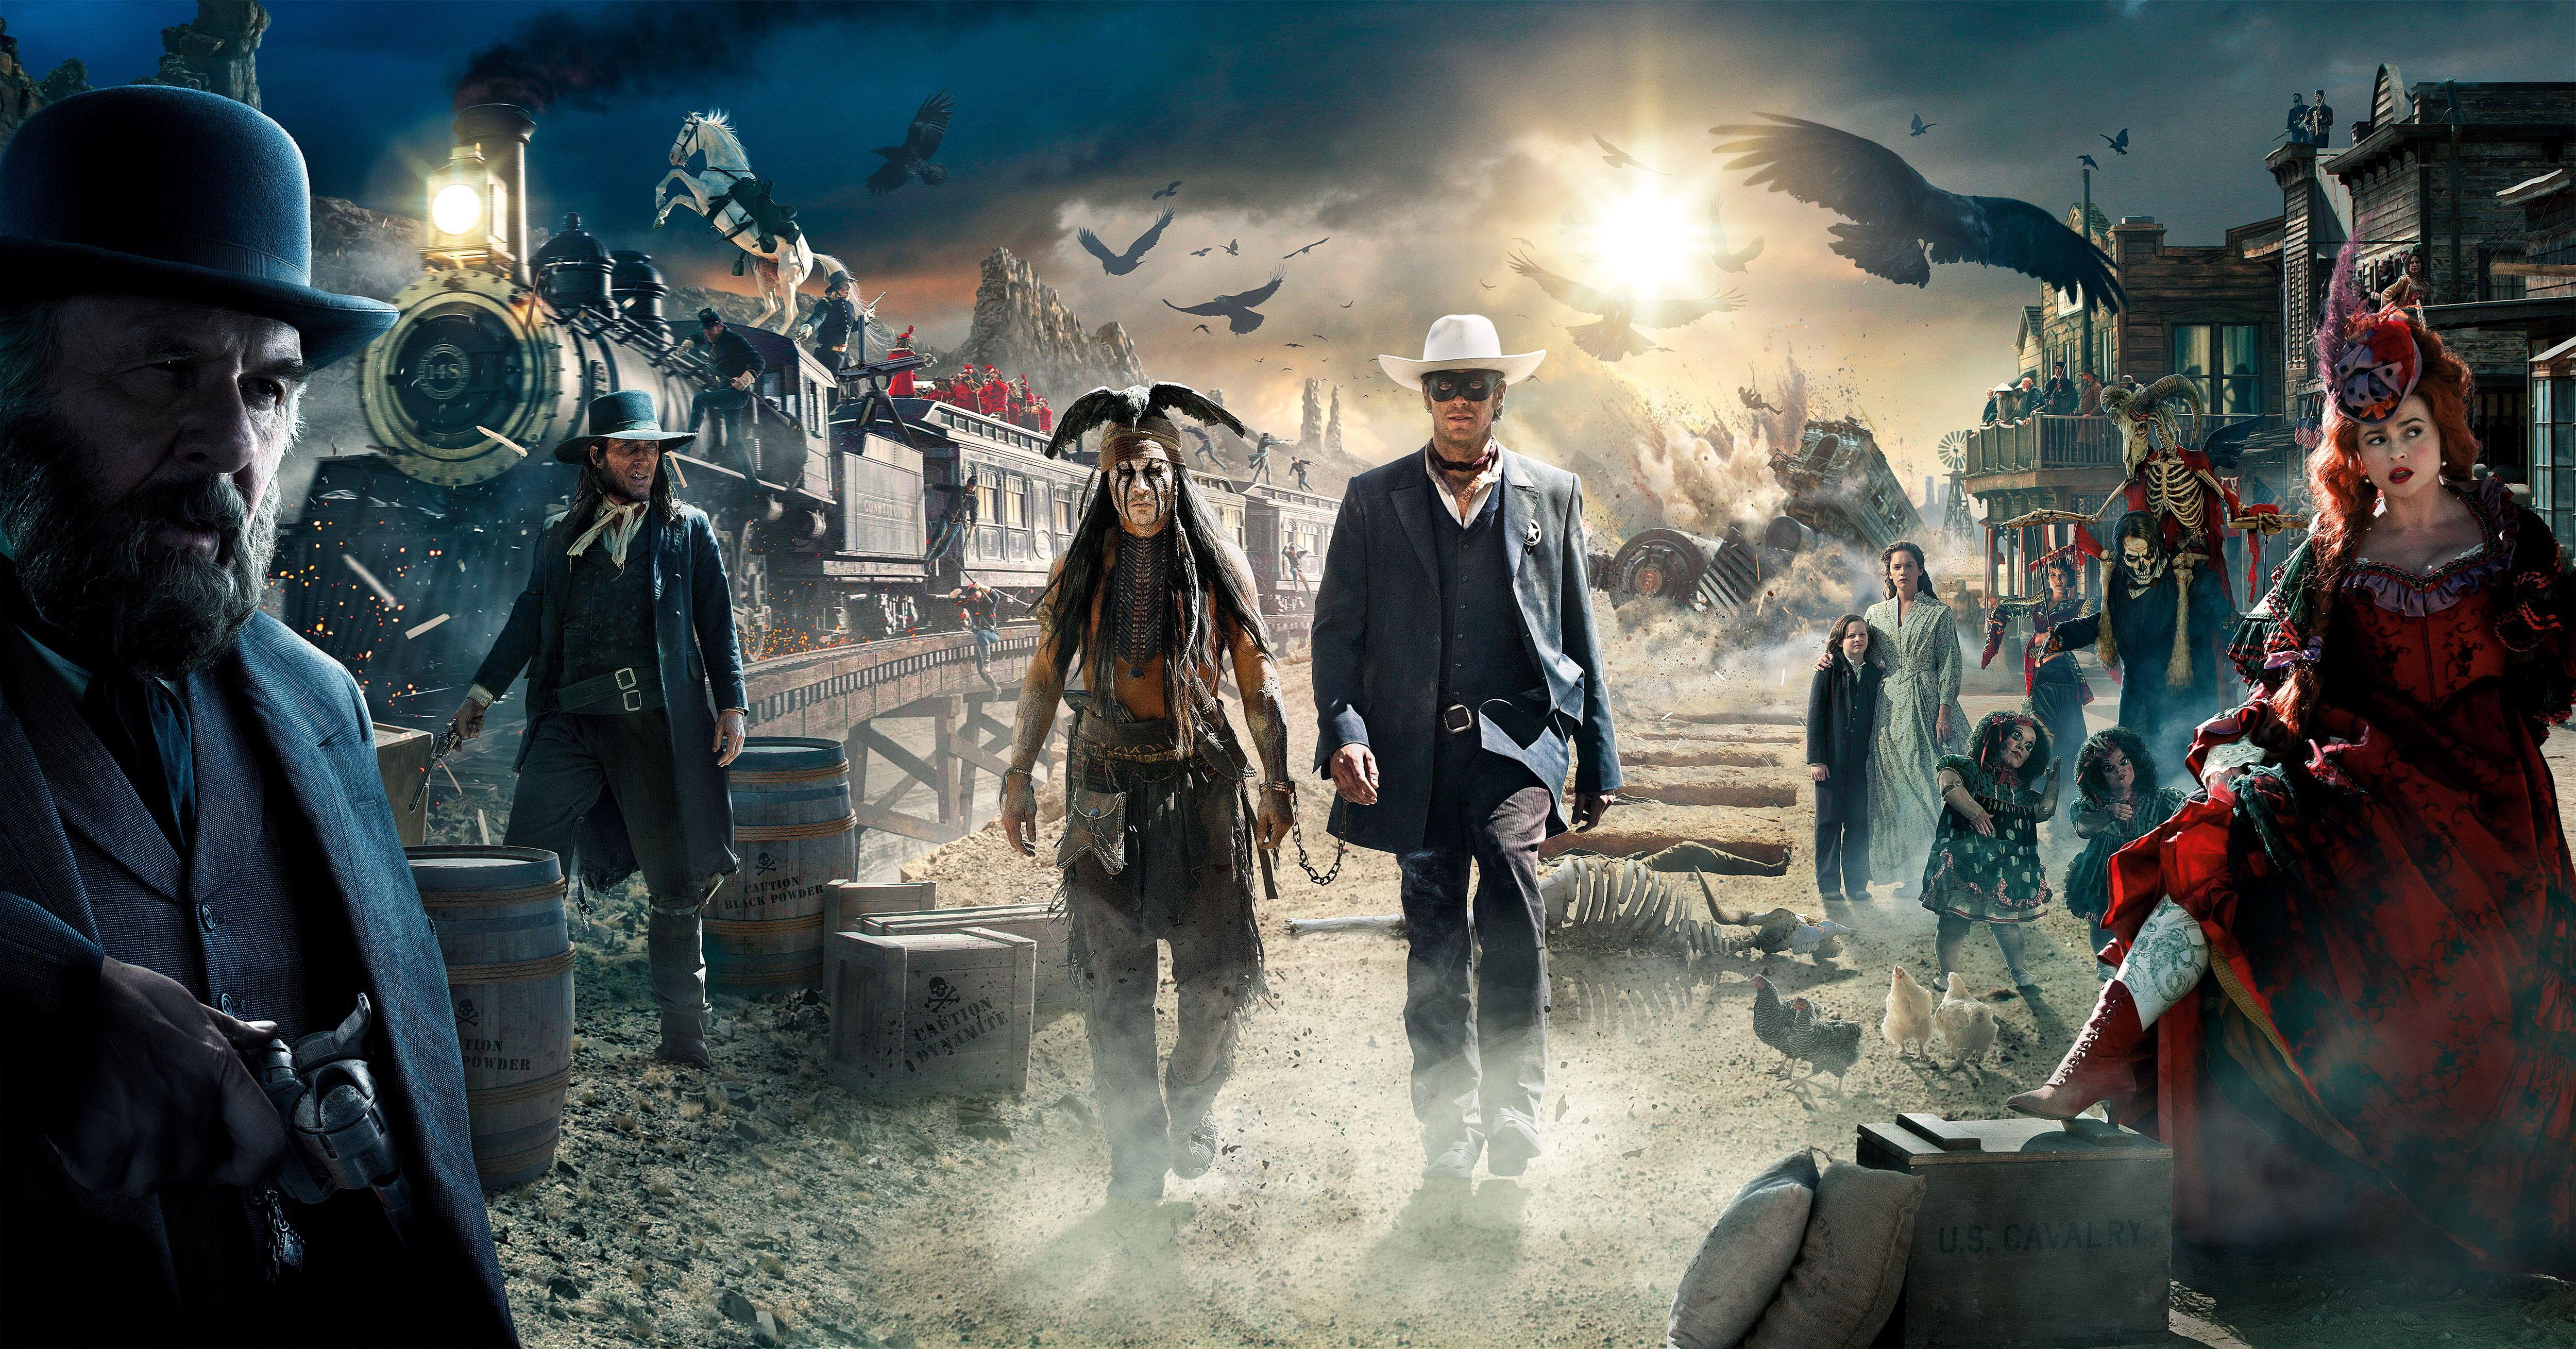 The Lone Ranger image The Lone Ranger HD wallpaper and background